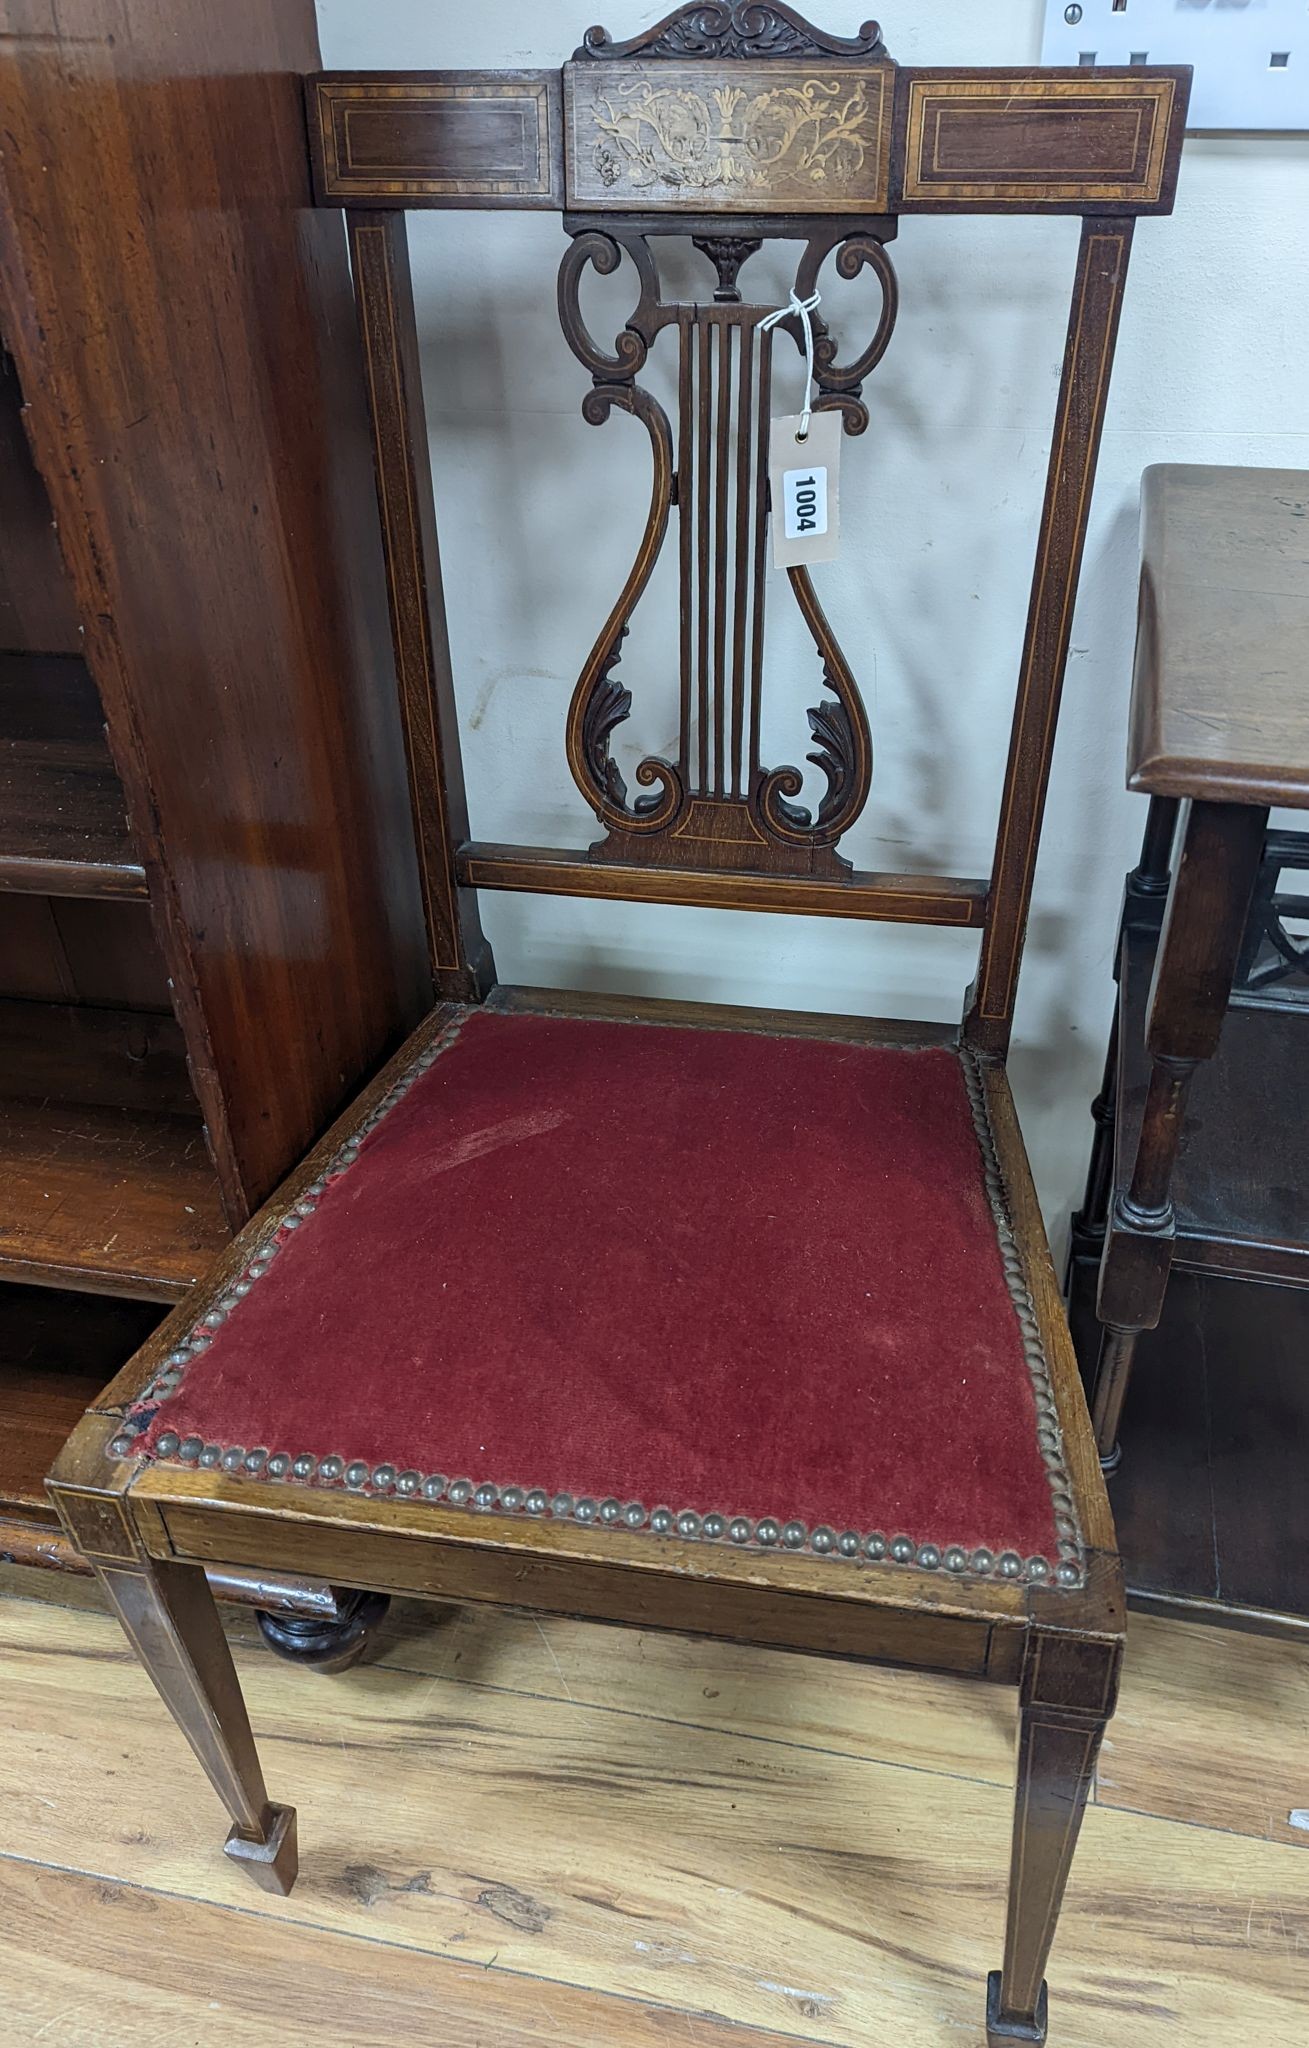 A pair of Edwardian inlaid mahogany lyre back chairs